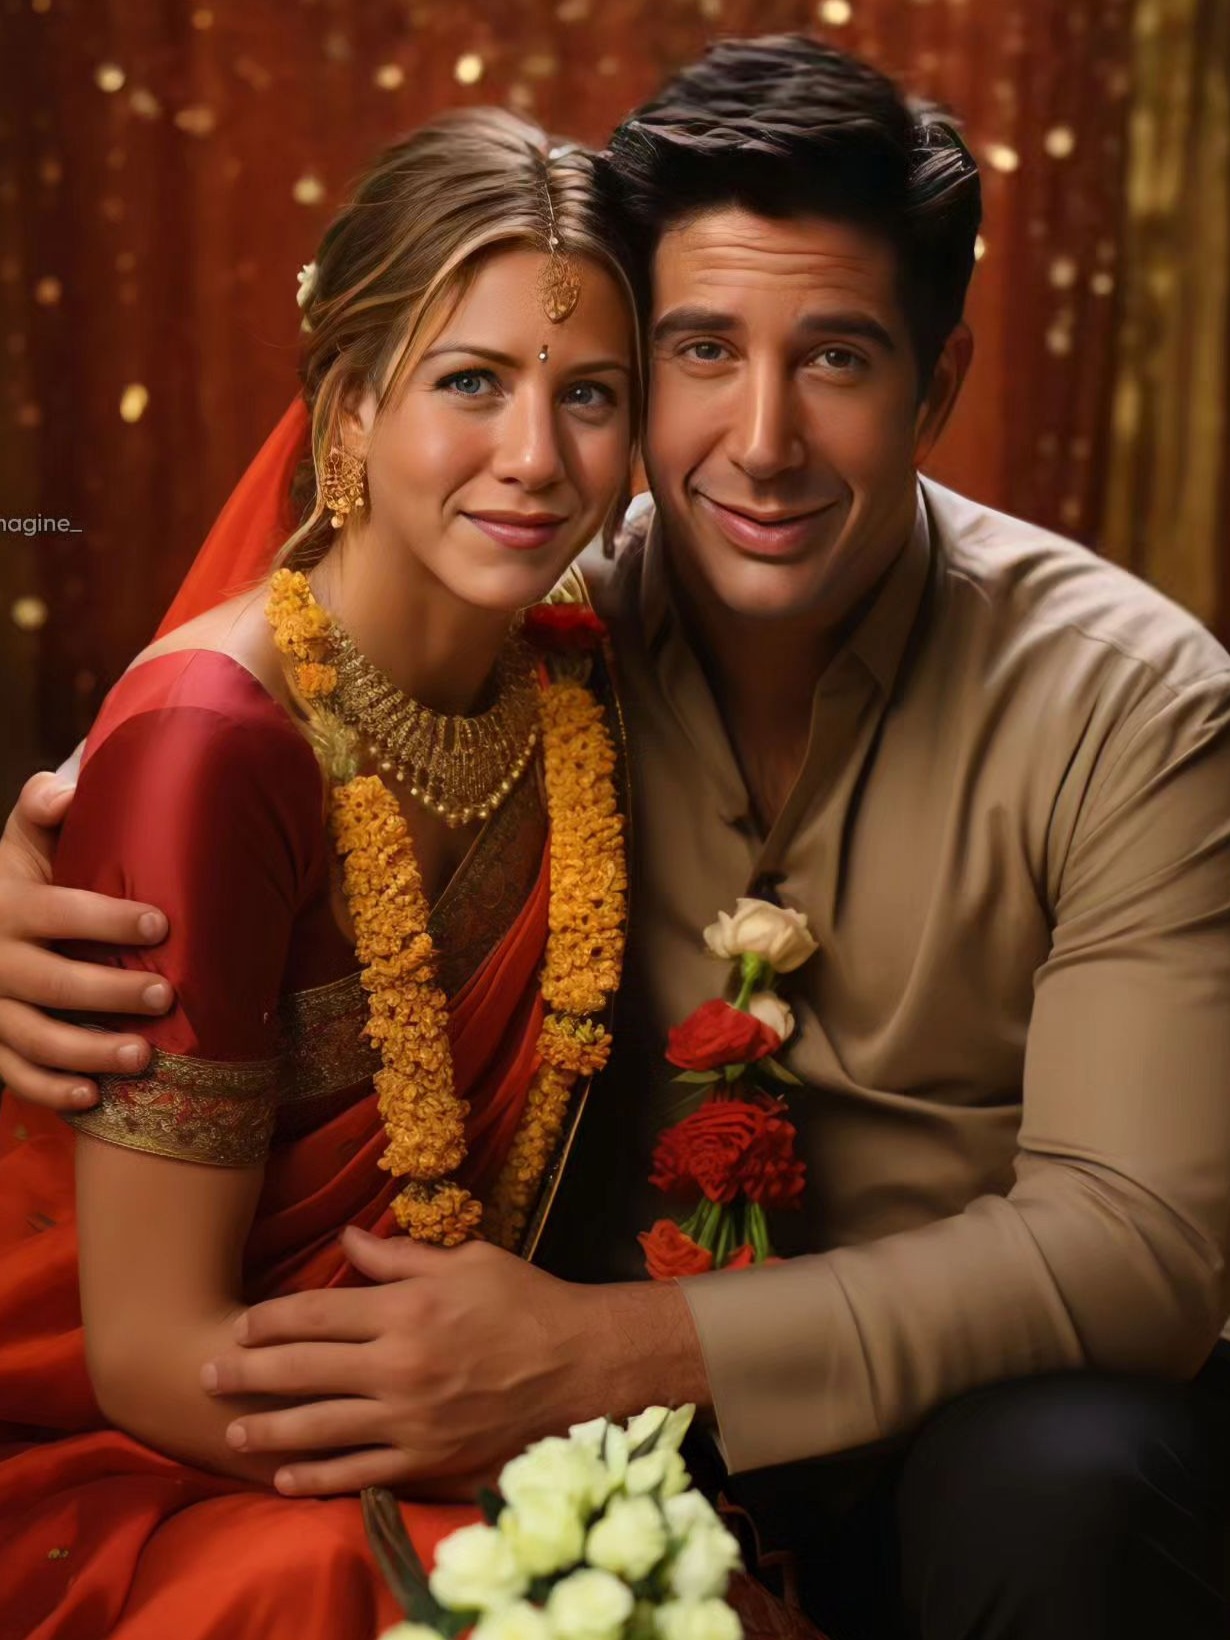 What If 'Friends' Was Made In India?